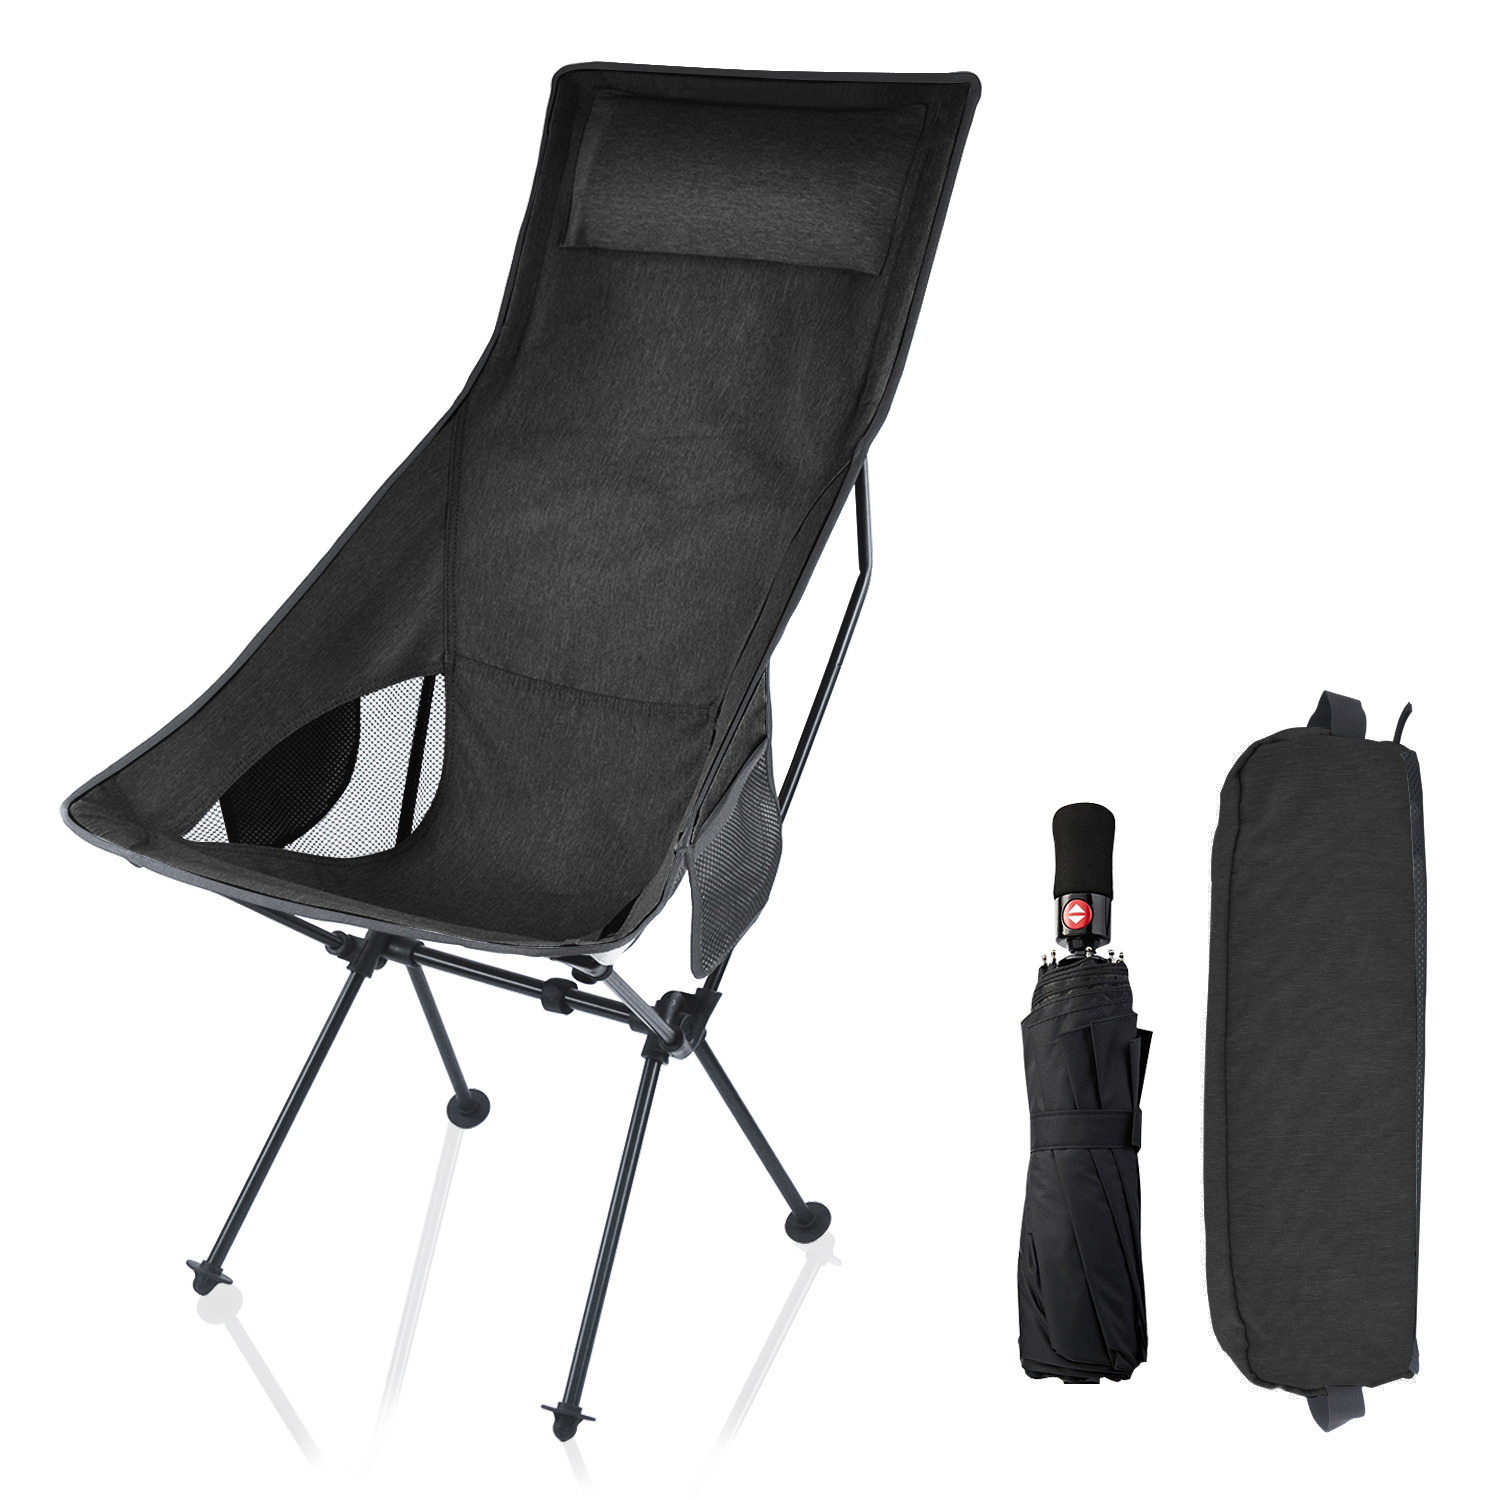 OEM Foldable Camping Chair For Adventure,Beach & Fishing